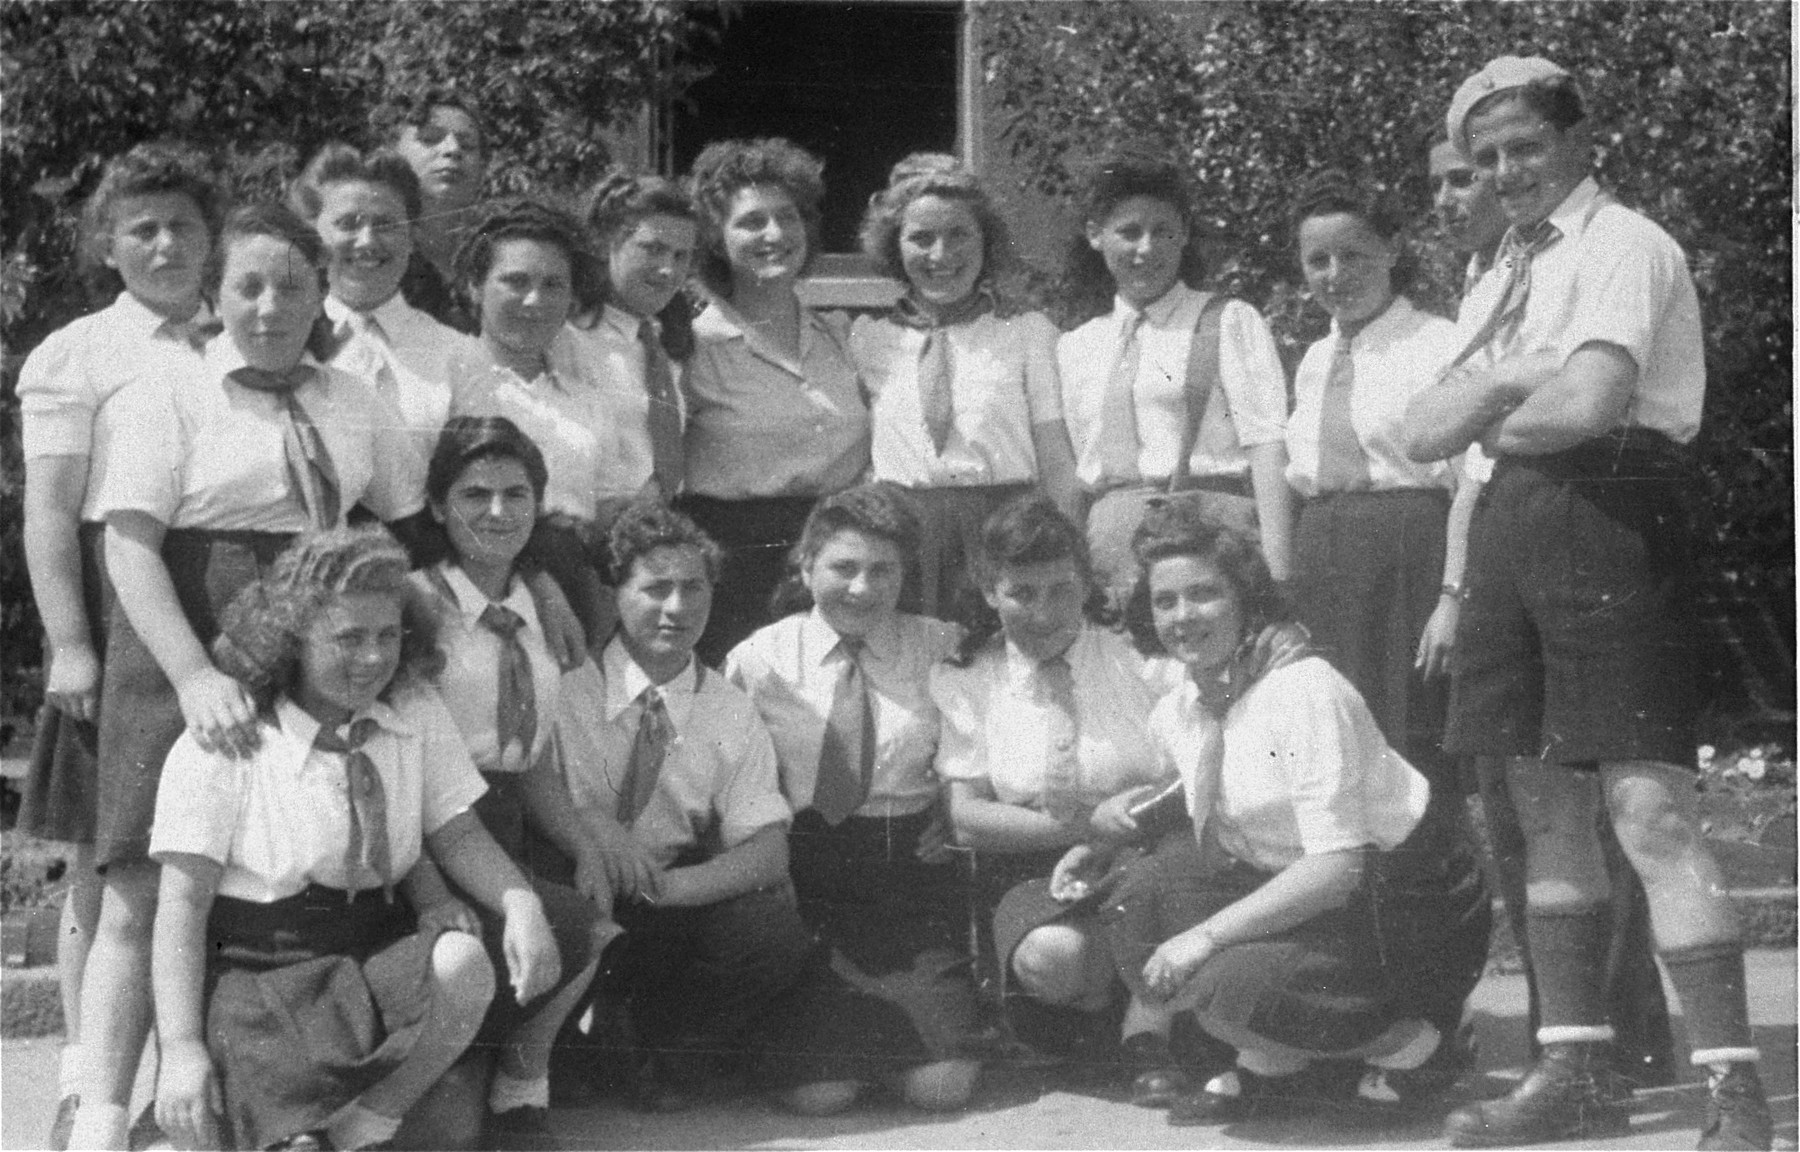 Group portrait of high school students in the Bergen-Belsen displaced persons camp.  

Among those pictured is Rozia Merin (front row, far right).